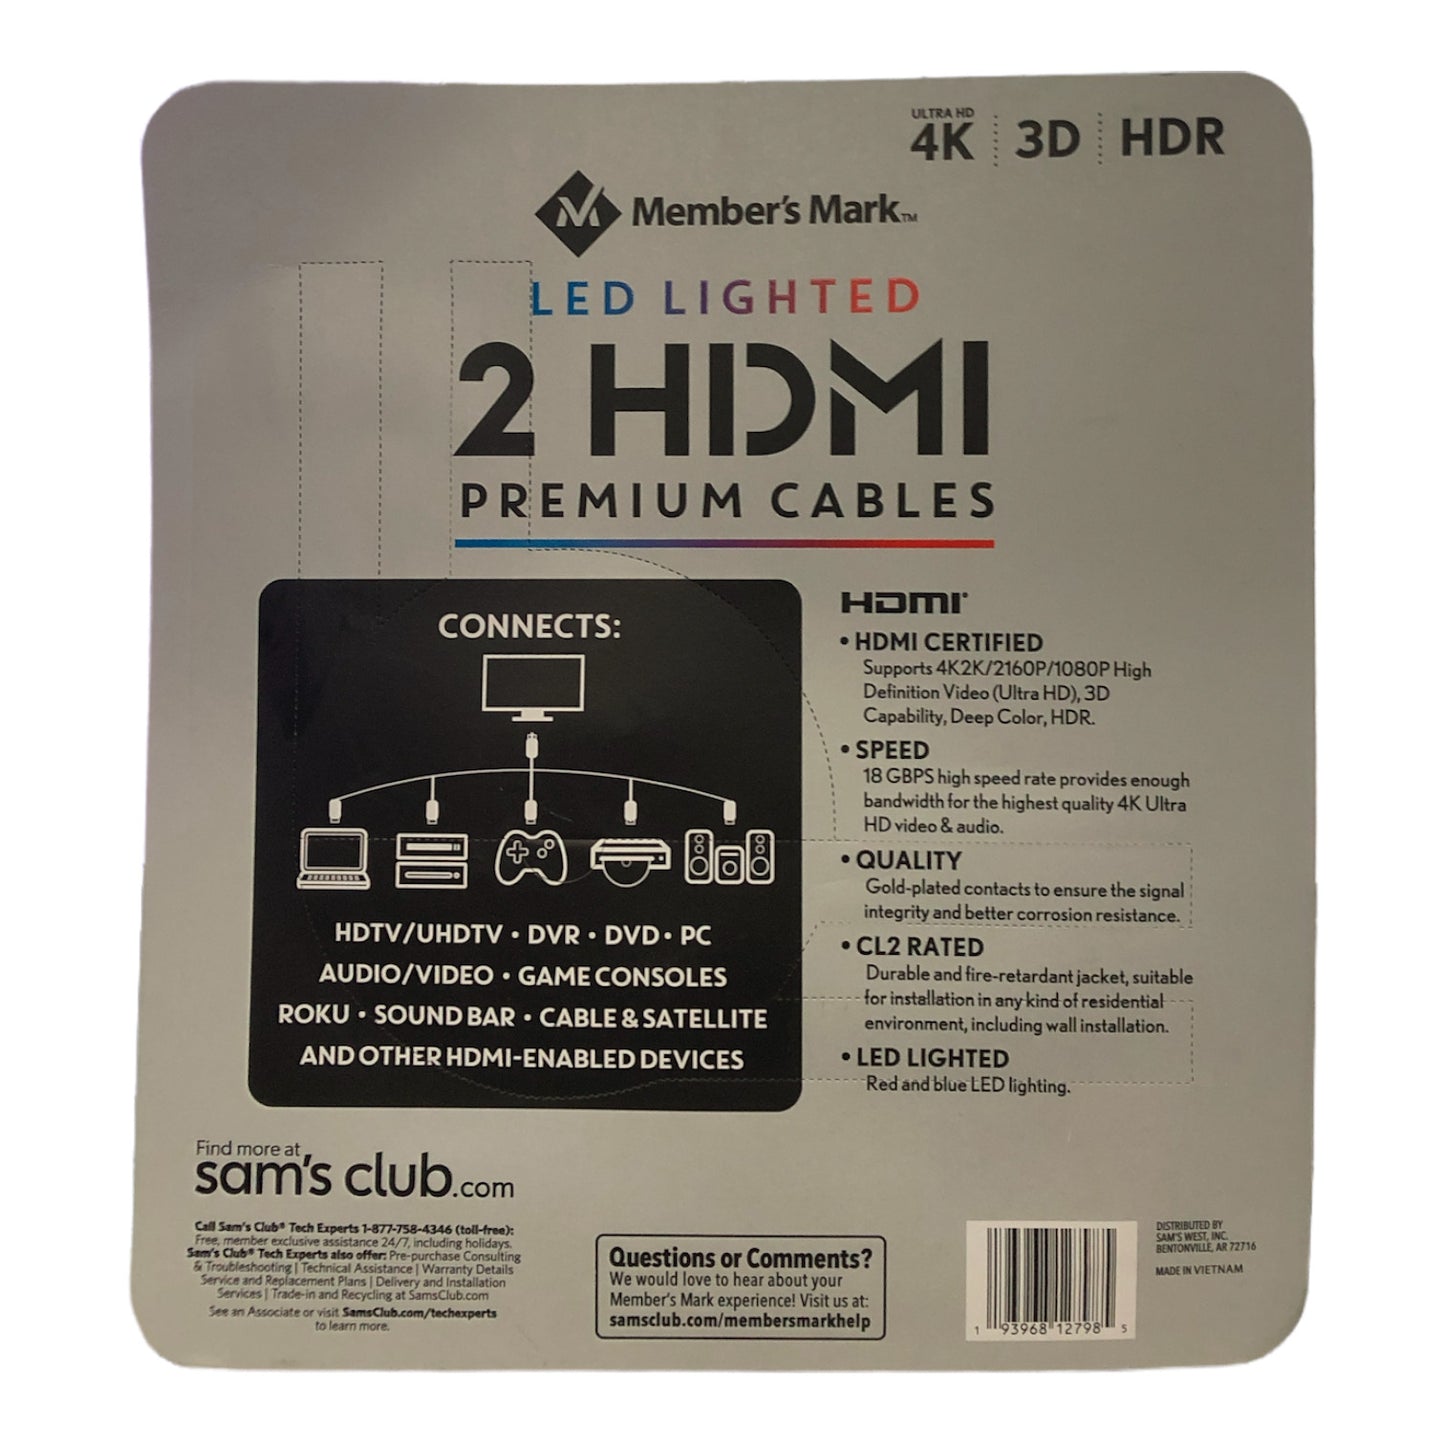 Member's Mark 9FT LED Lighted HDMI Premium Cables, 2 Pack